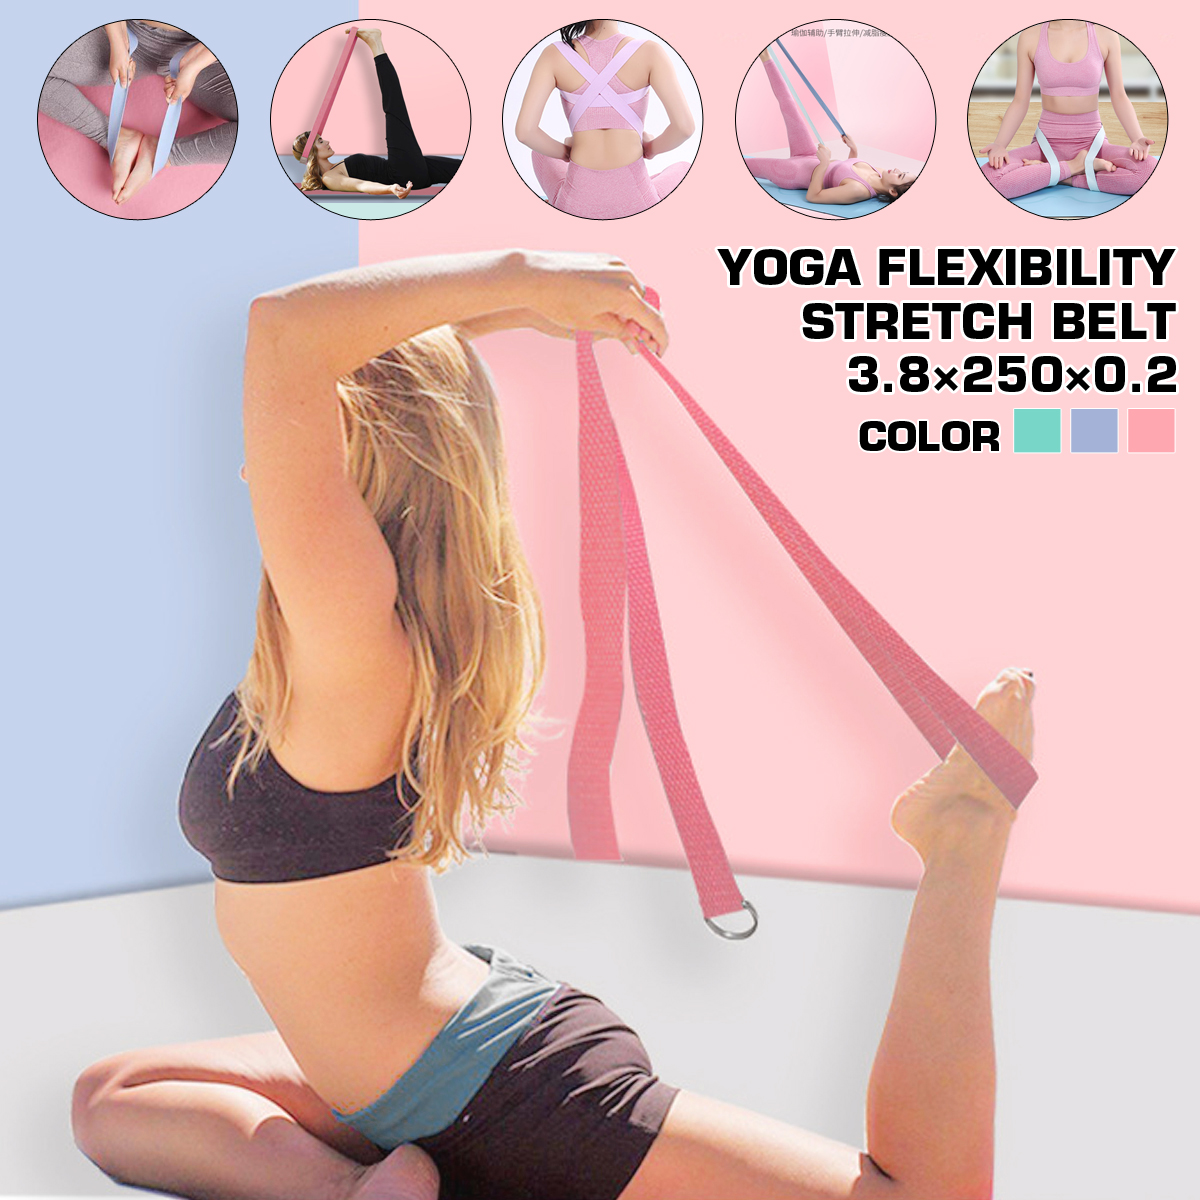 Yoga-Stretch-Strap-D-Ring-Inelastic-Sport-Fitness-Arm-Legs-Waist-Training-Yoga-Rope-Exercise-Tools-1672196-1